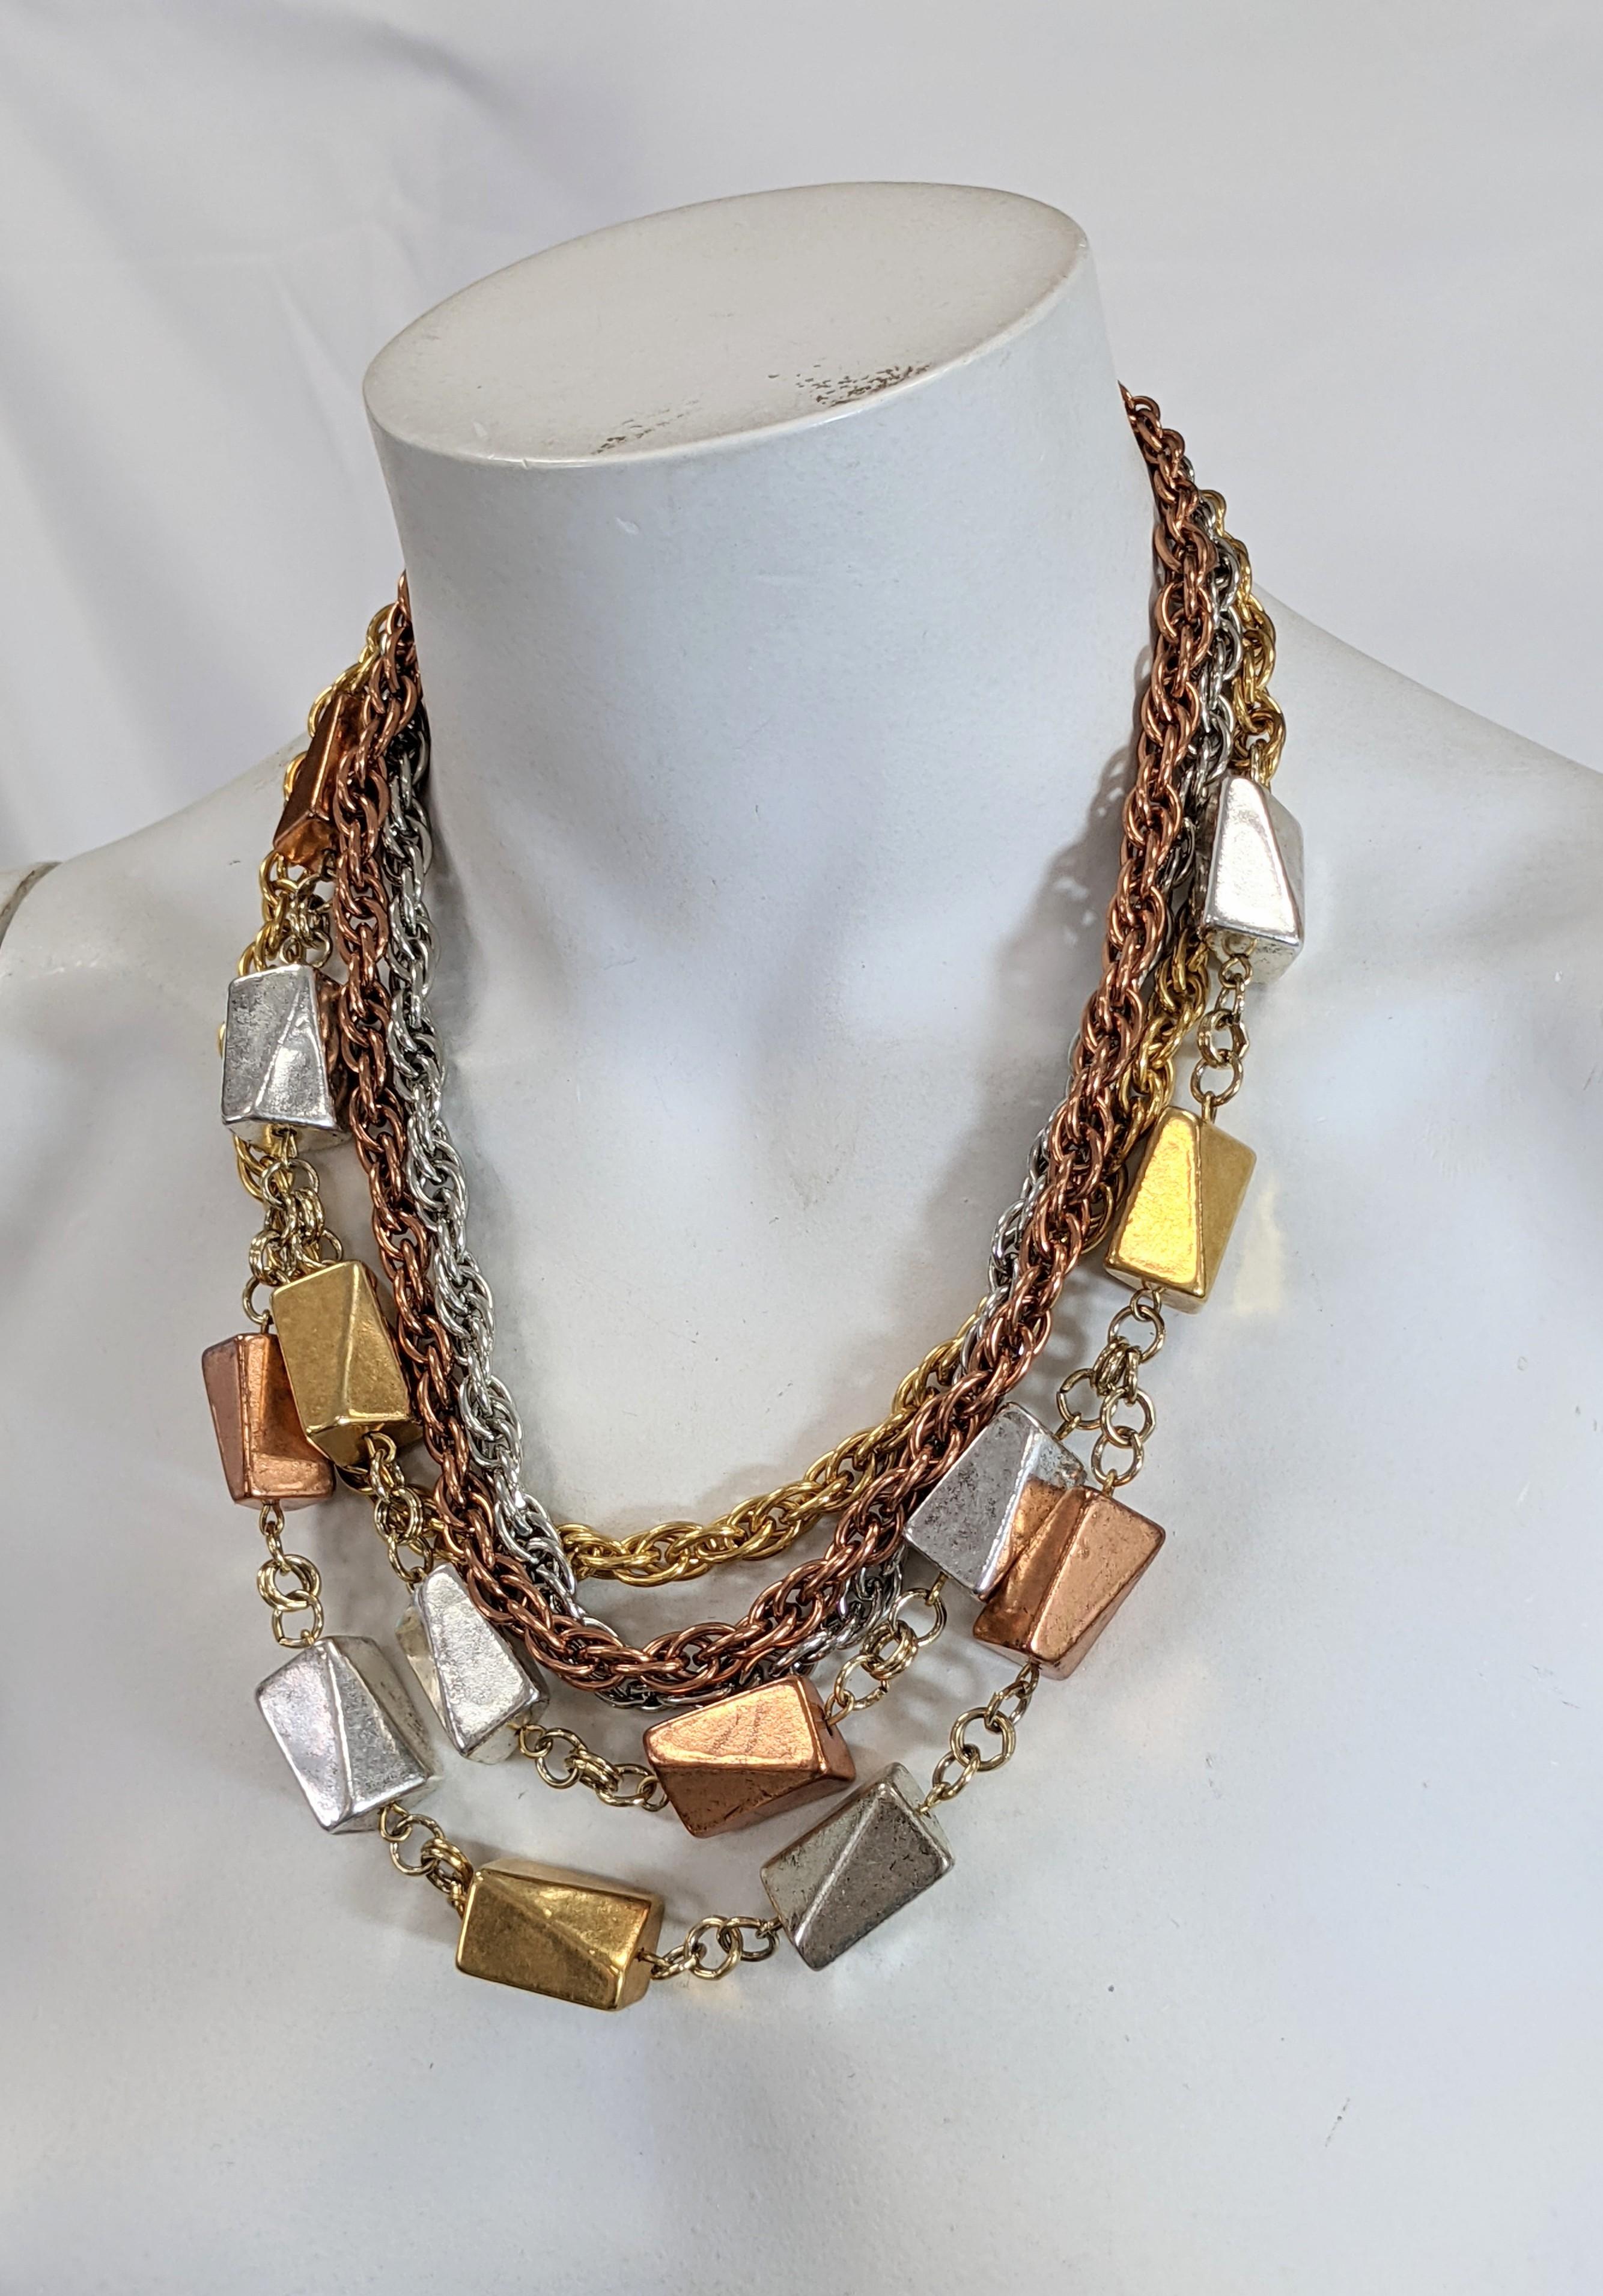 Unusual and striking Monet retro link chain necklace. The five strands of rose gold, yellow gold and silver accented with one and a half strands of cubistic rectangular metal clad bakelite resin beads of rose and yellow gold and silver plate.